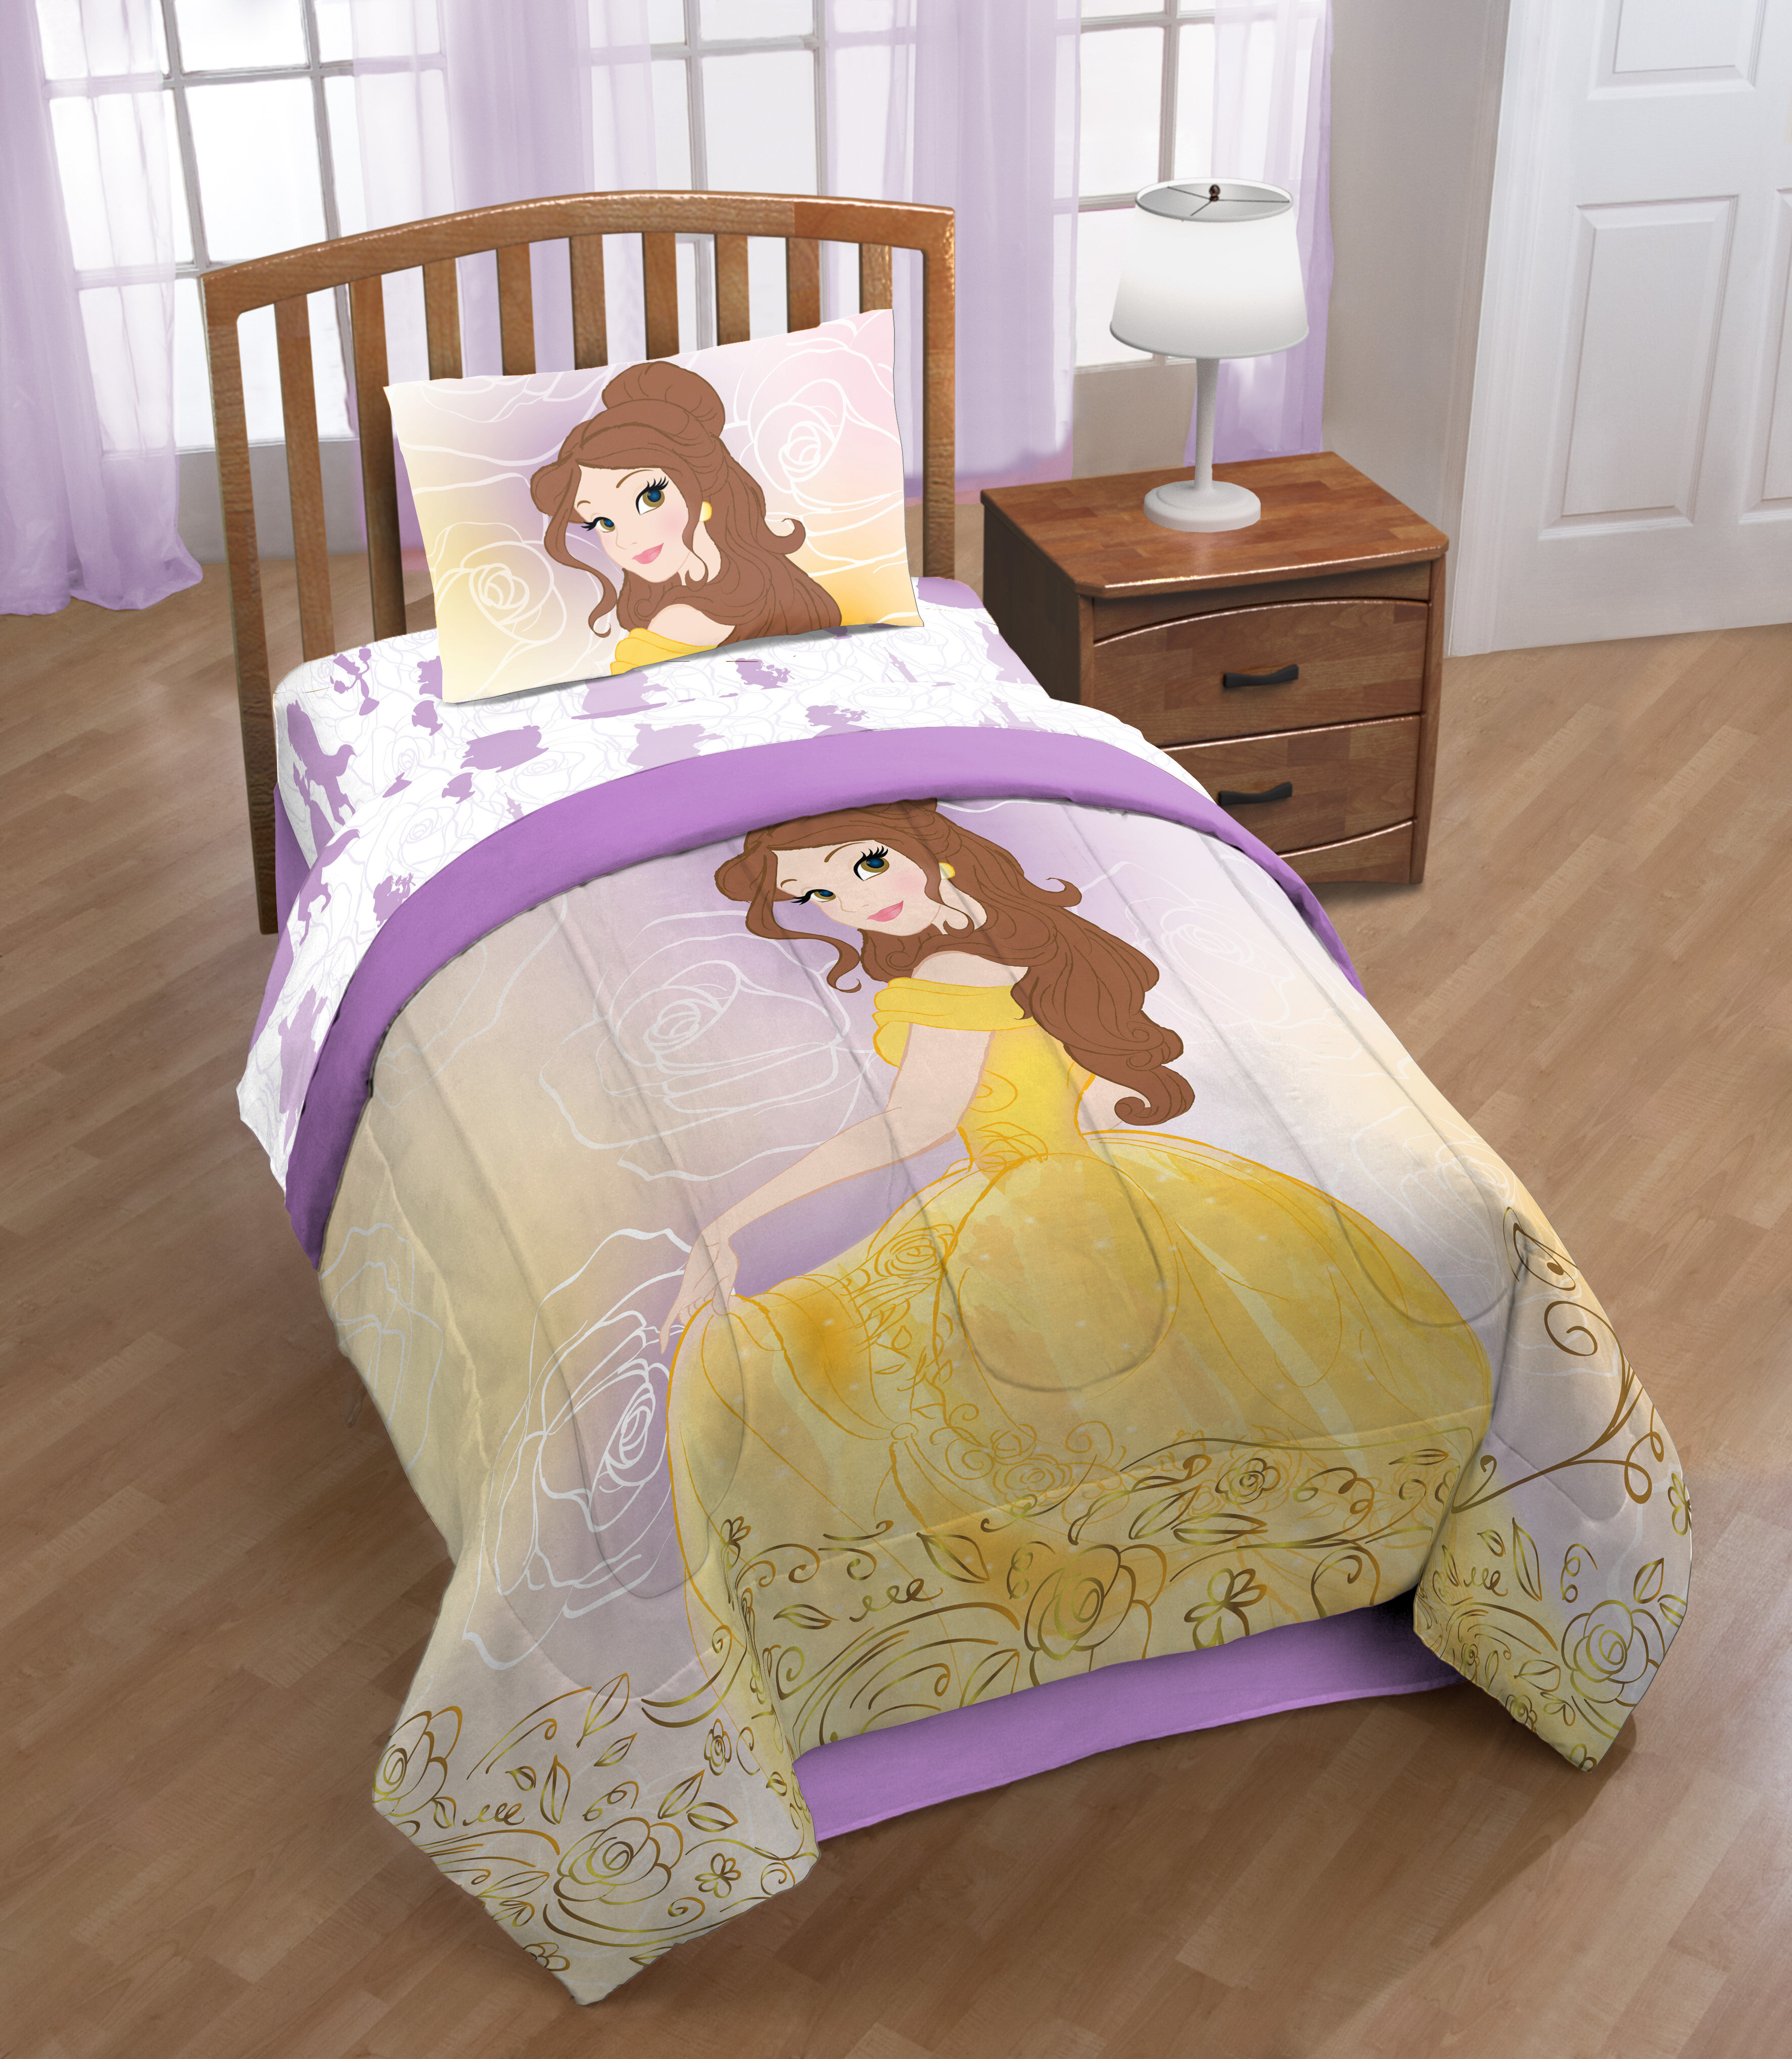 beauty and the beast crib bedding